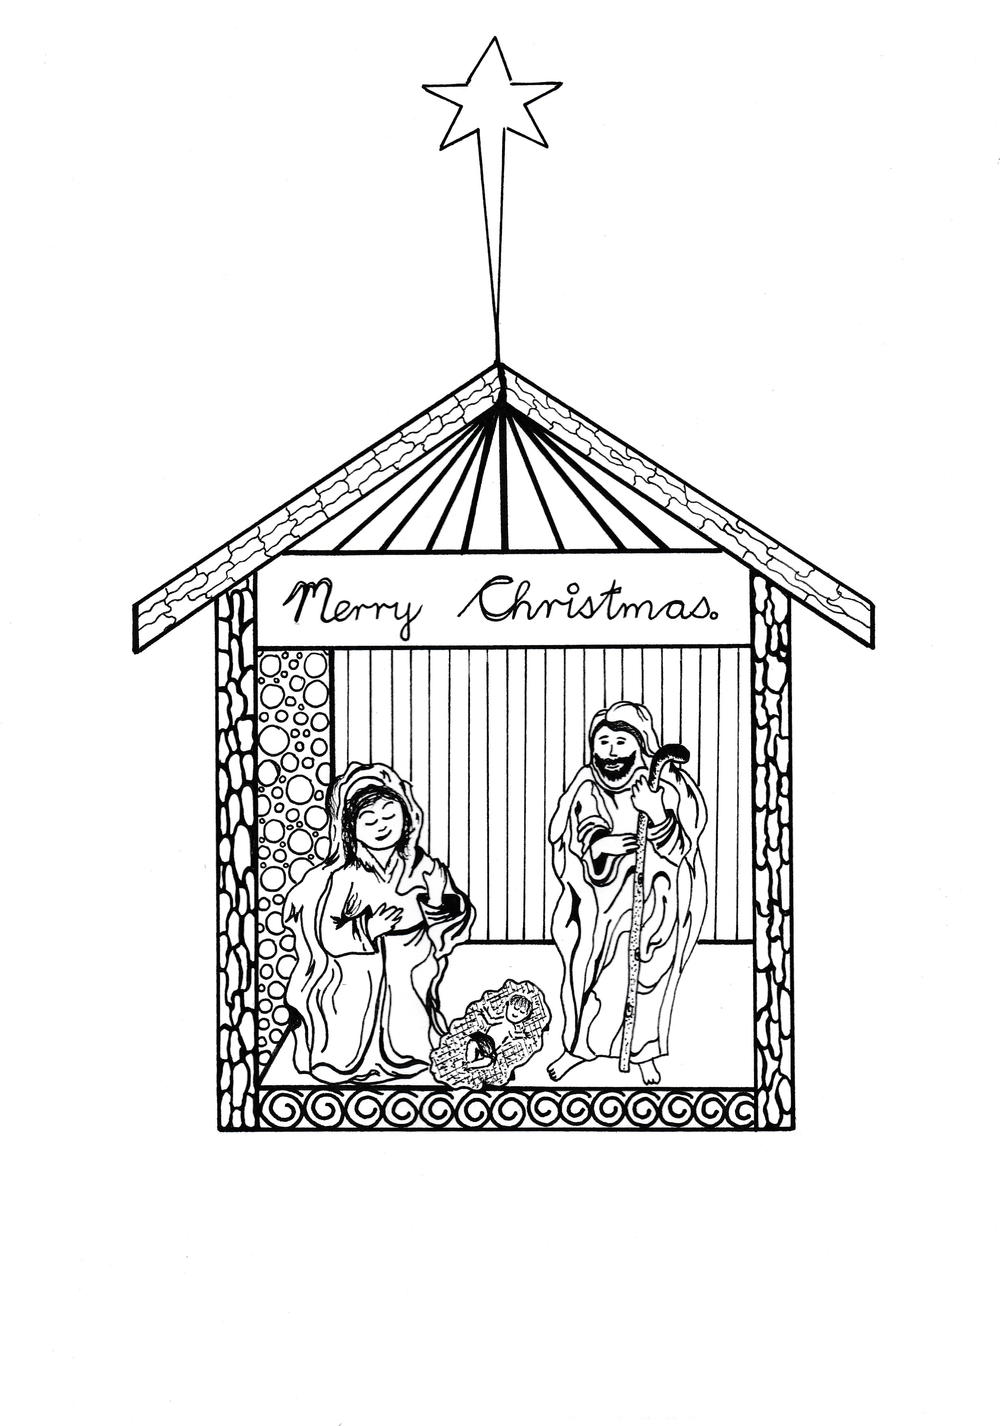 Download Free Printable Nativity Scene Coloring Pages ...